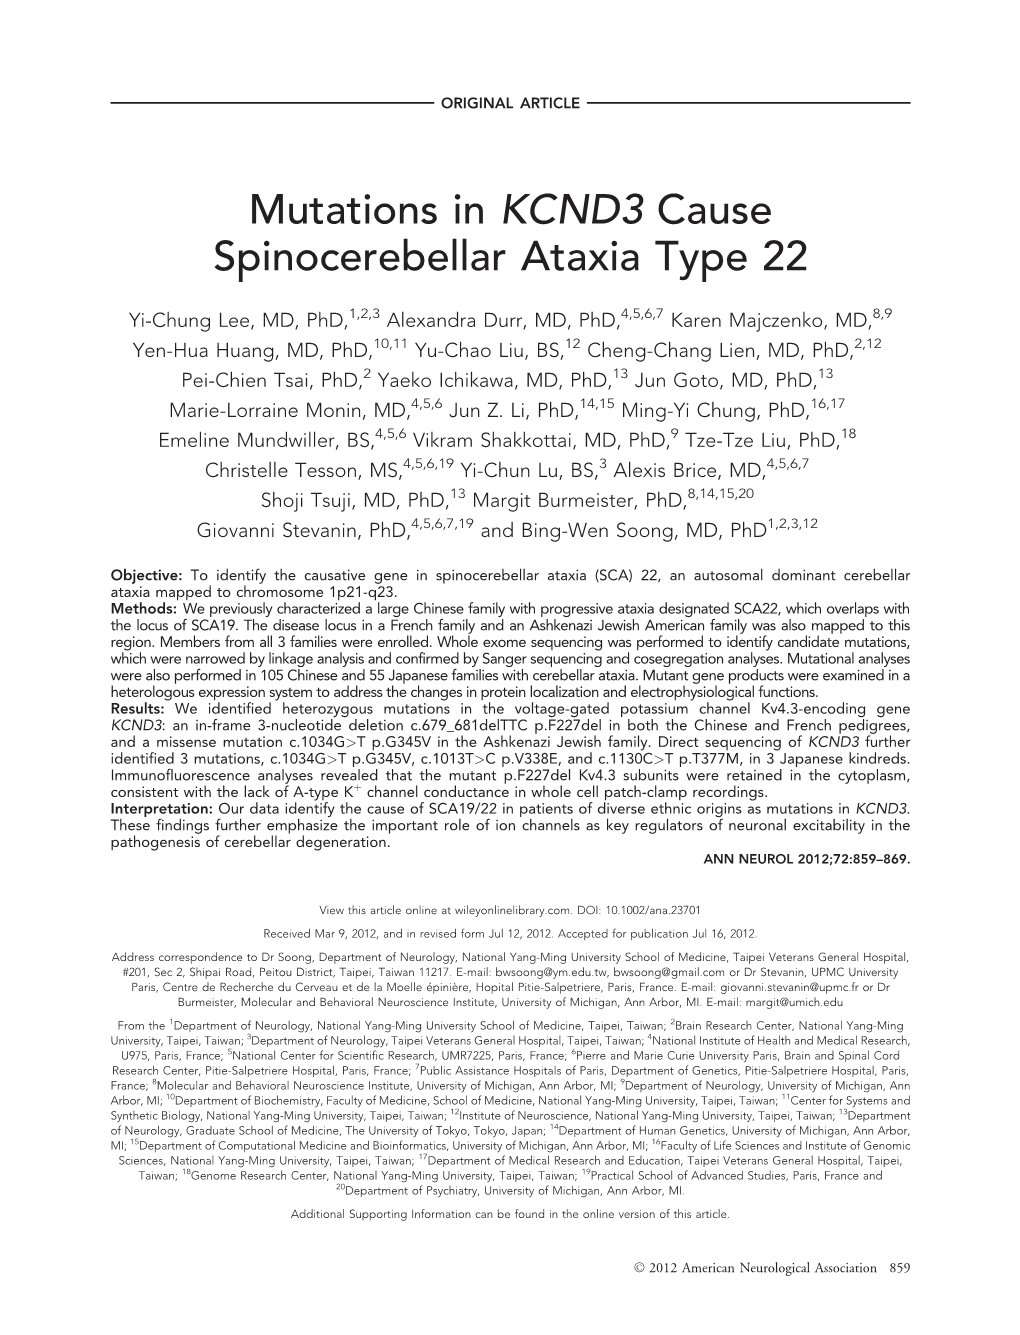 Mutations in KCND3 Cause Spinocerebellar Ataxia Type 22